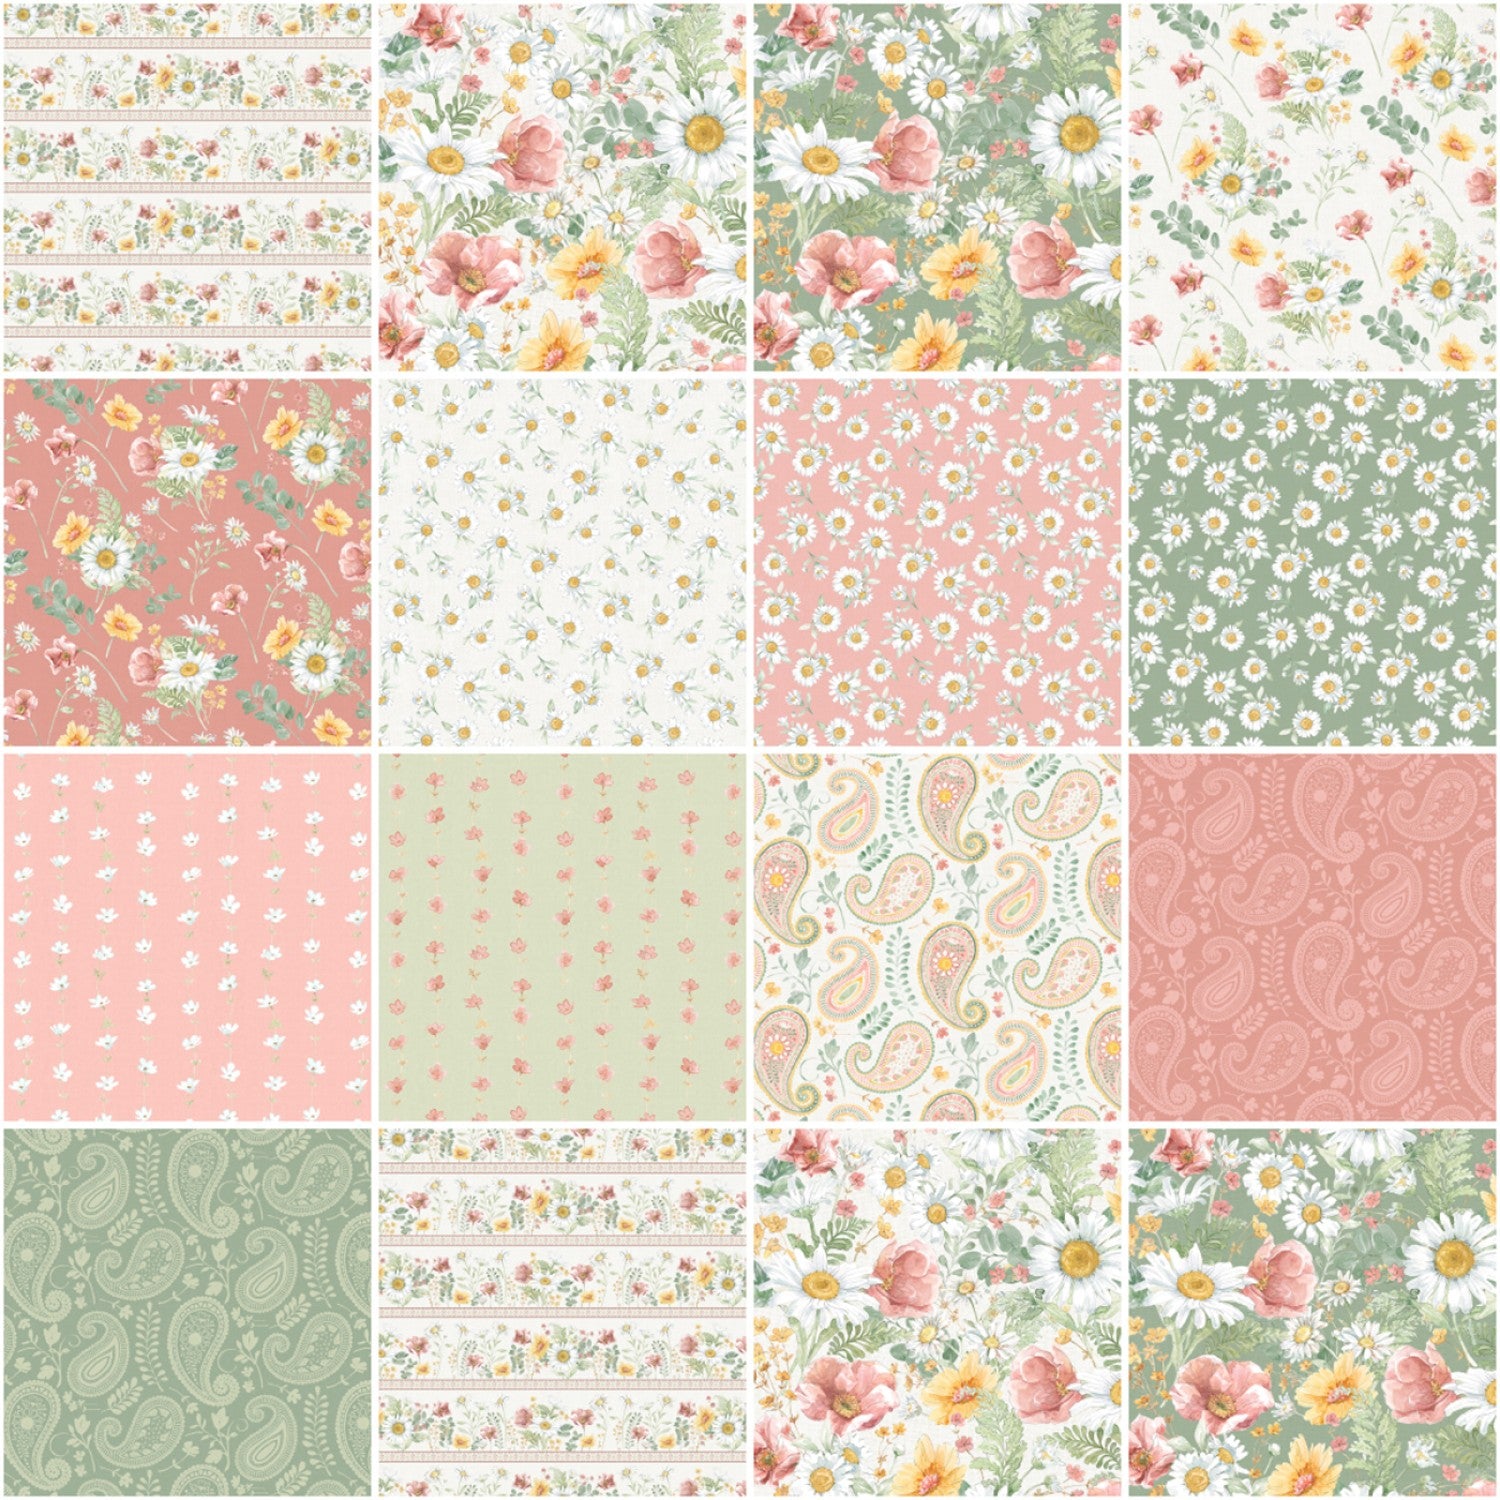 Daisy Days 5-inch Charm Pack by Beth Grove for Wilmington (42pcs)